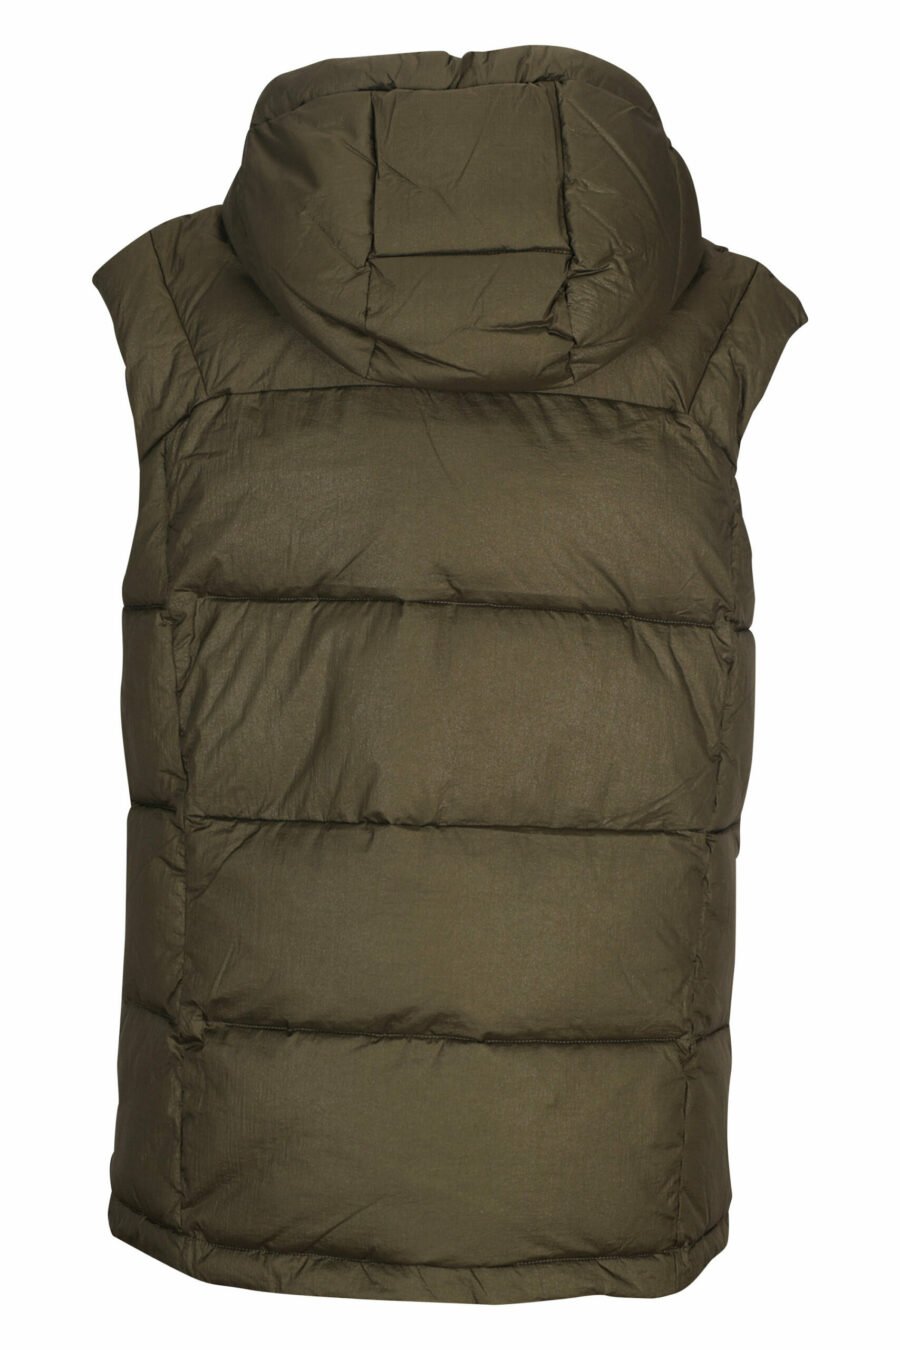 Dark green hooded waistcoat with diagonal lines - 8058610610968 2 scaled